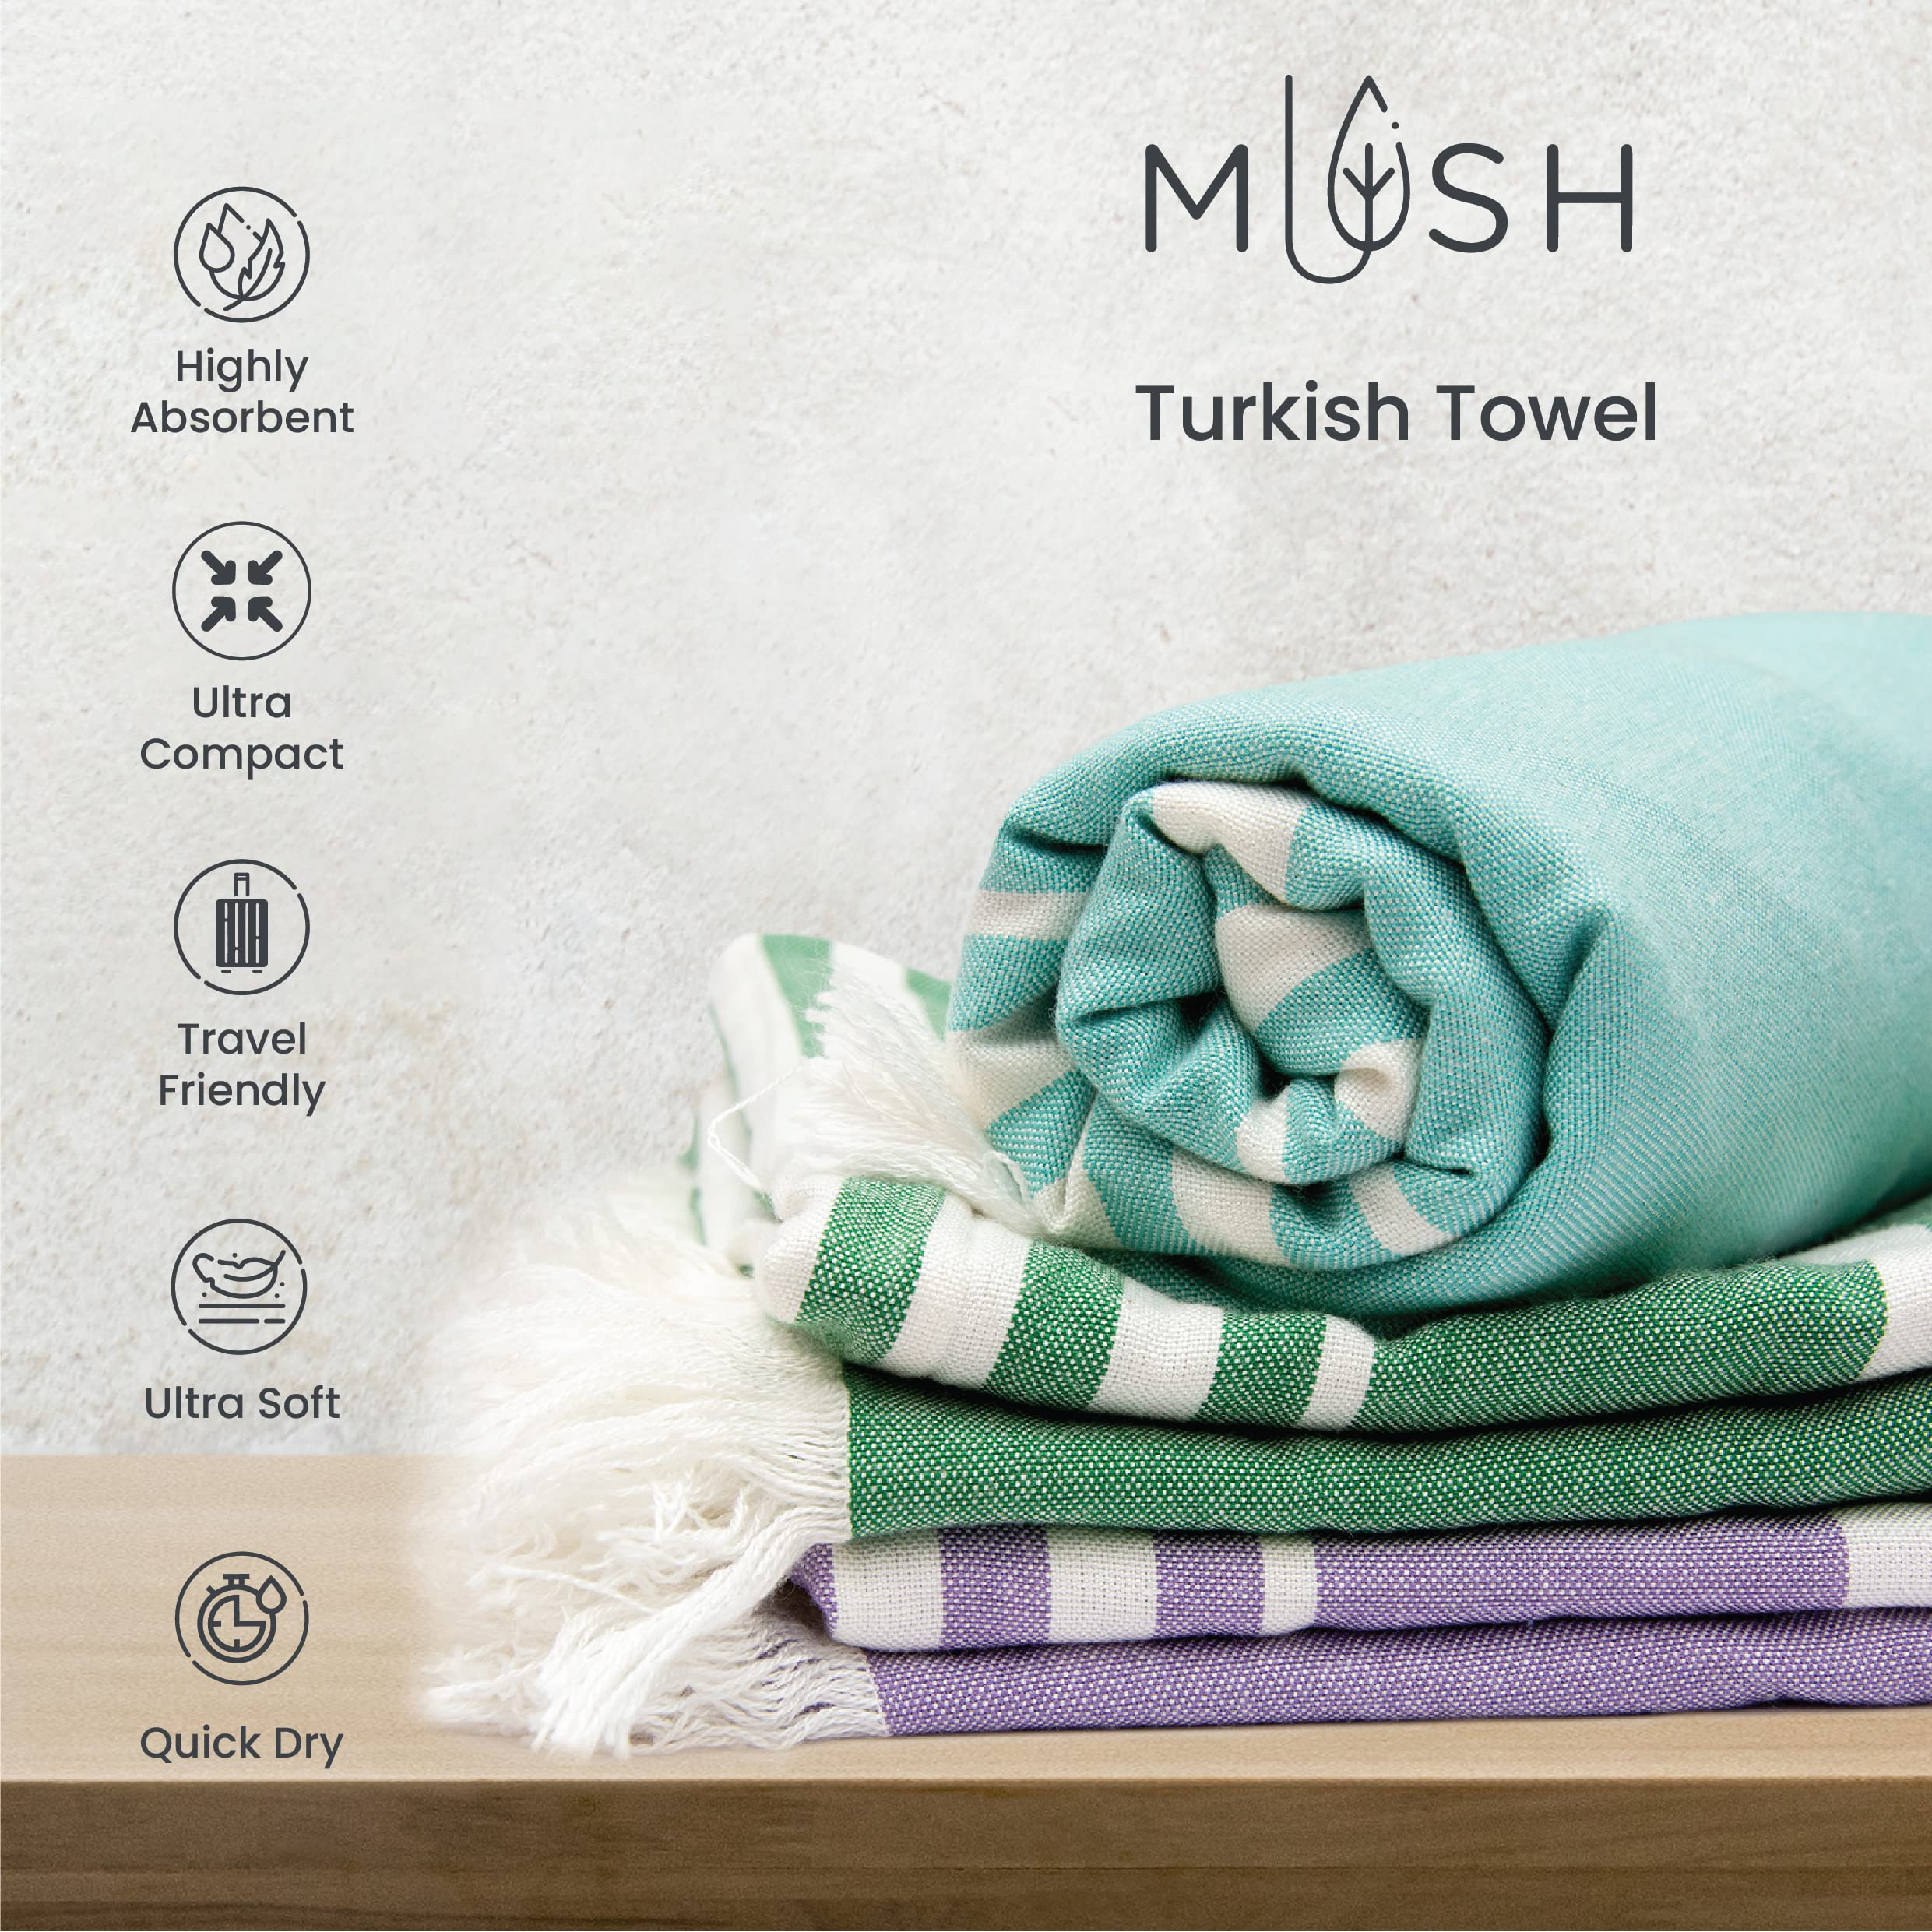 Mush 100% Bamboo Light Weight & Ultra-Compact Turkish Towel Super Soft, Absorbent, Quick Dry, Anti-Odor Bamboo Towel for Bath, Travel, Gym, Swim and Workout (2, Peach - Aqua)